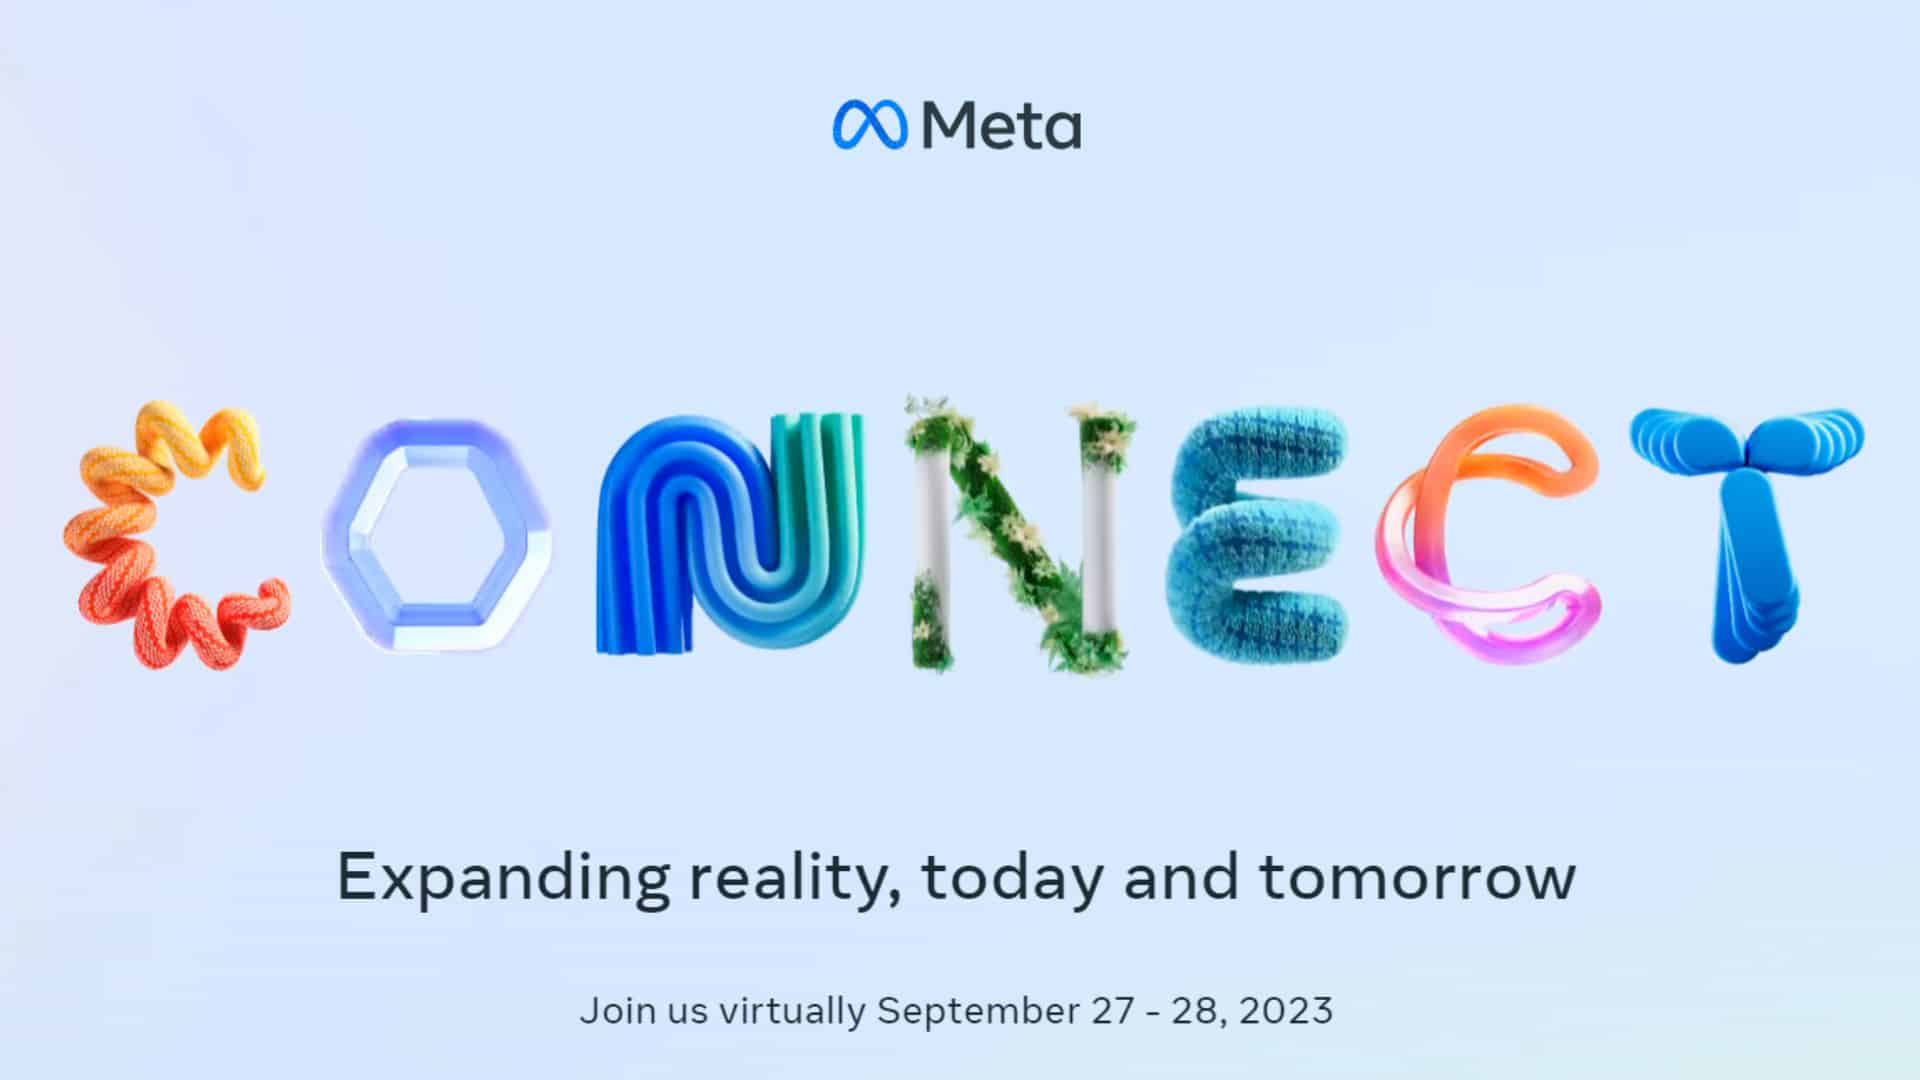 Meta Connect 2022: Meta Quest Pro, More Social VR and a Look Into the  Future